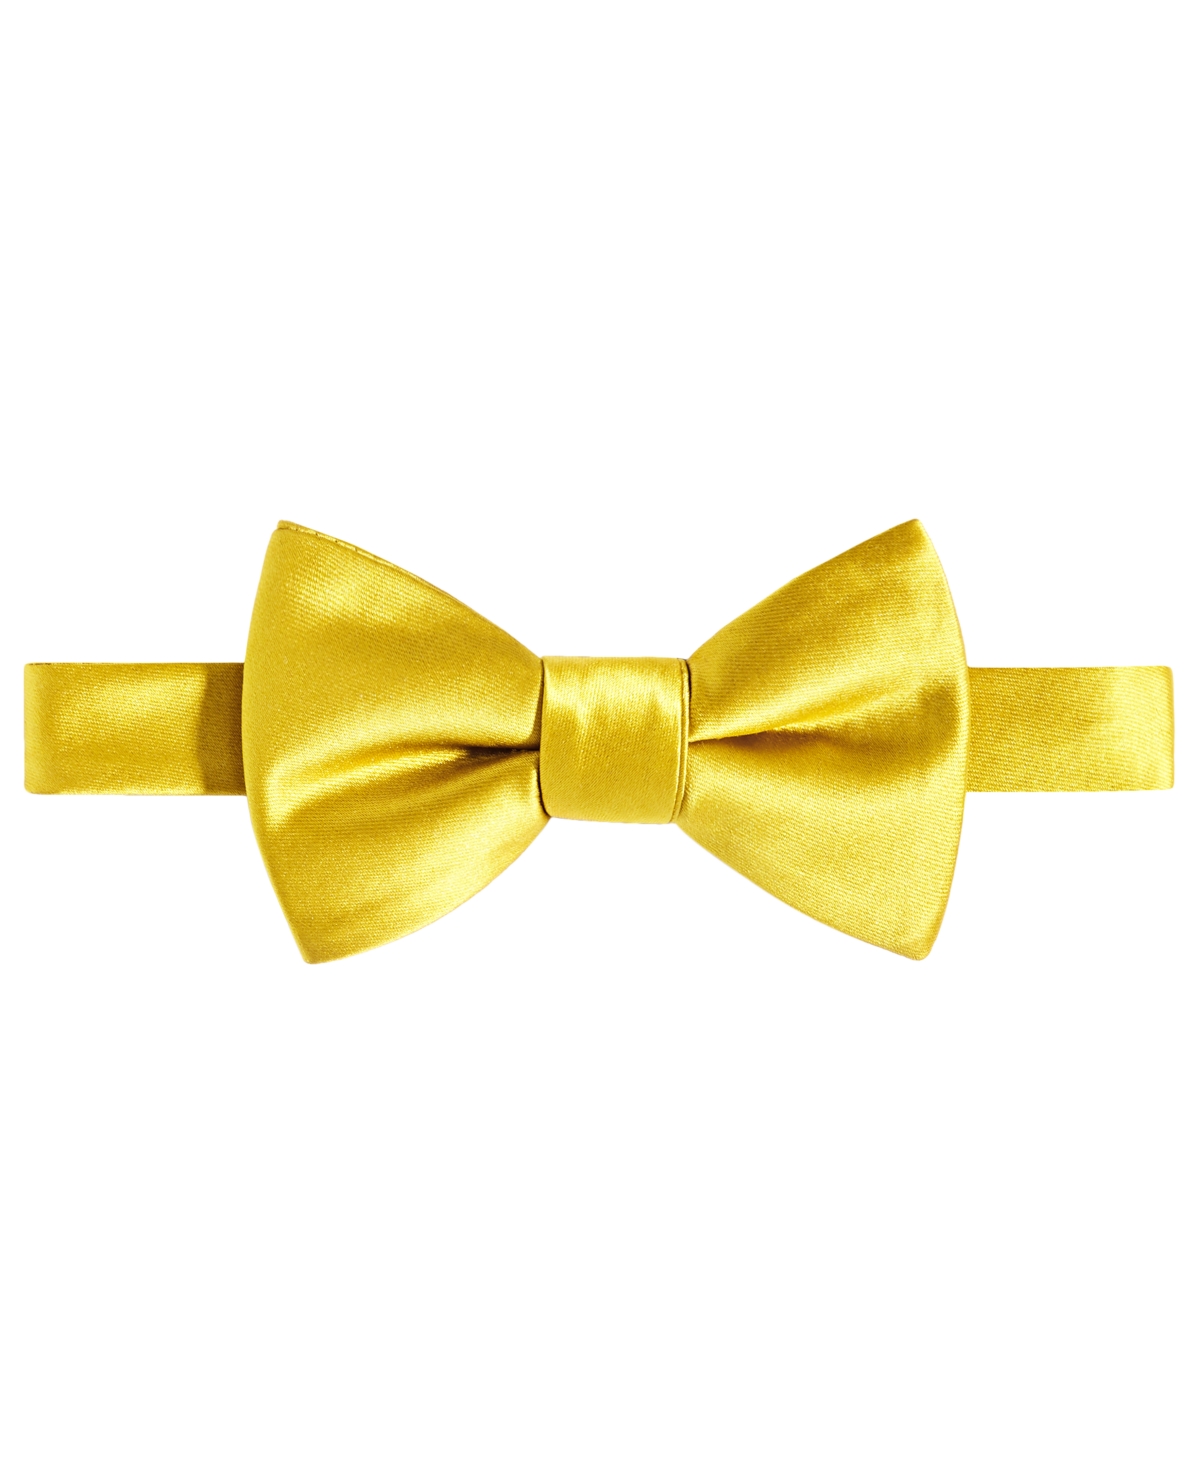 Shop Tayion Collection Men's Black & Gold Solid Bow Tie